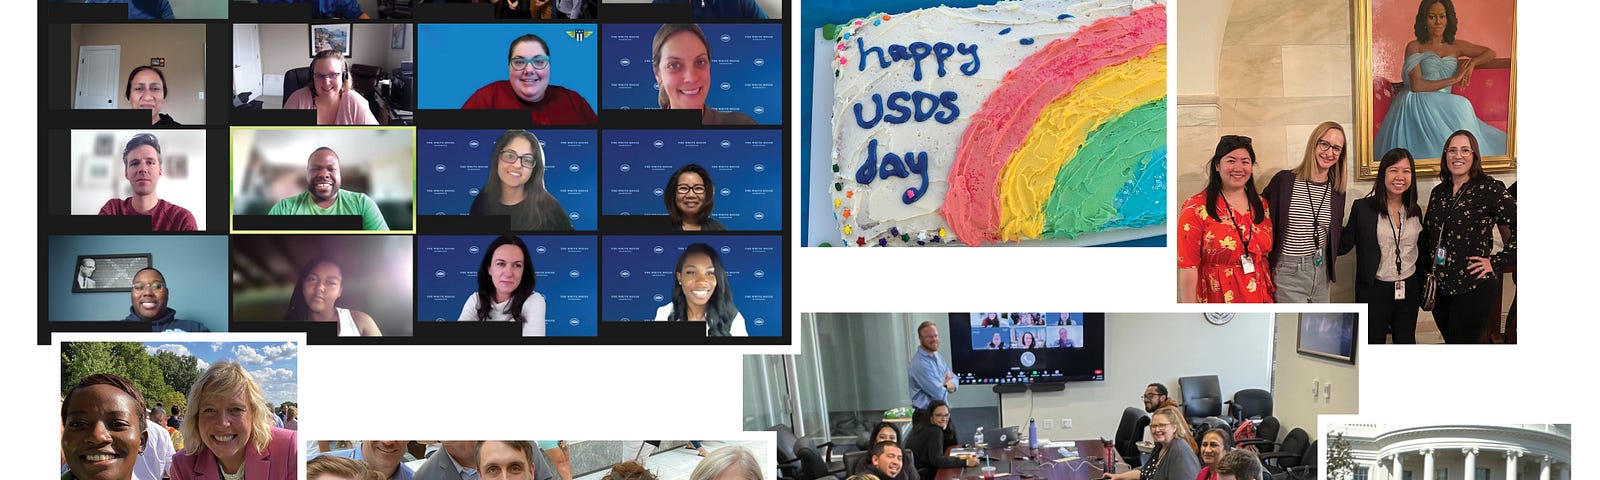 A collage of images featuring USDS employees. The top left is a virtual meeting with a screen of squares representing each attendee; Under is a photo of two USDS employees standing outside smiling; To the right a photo of three men and two women taking a selfie; To the right a photo of a people sitting around a table in an office; To the right, a photo of a man and a woman smiling in front of the White House; above, five women stand in front of a portrait; To the left, a “Happy USDS Day” cake